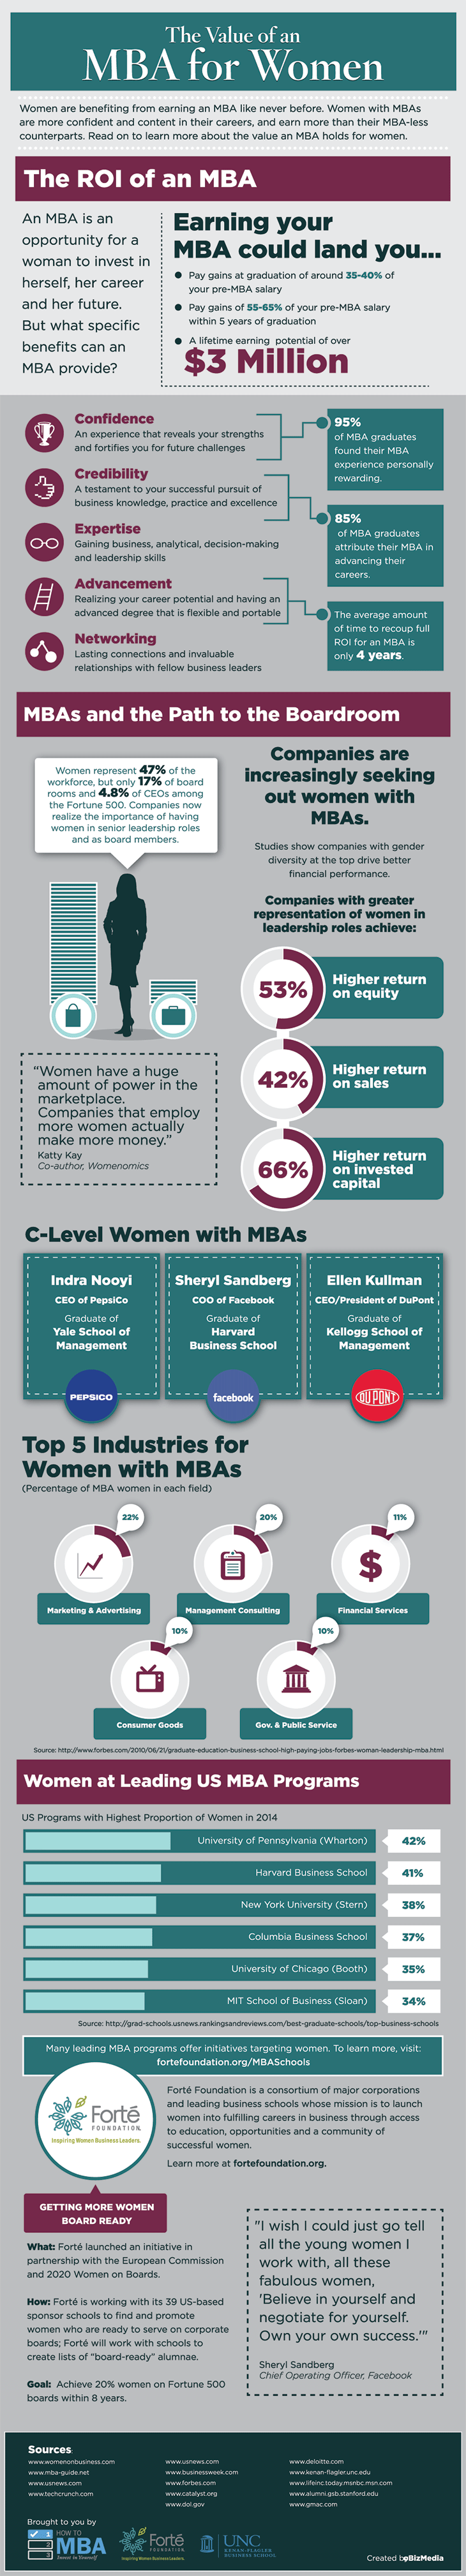 The Value of an MBA for Women